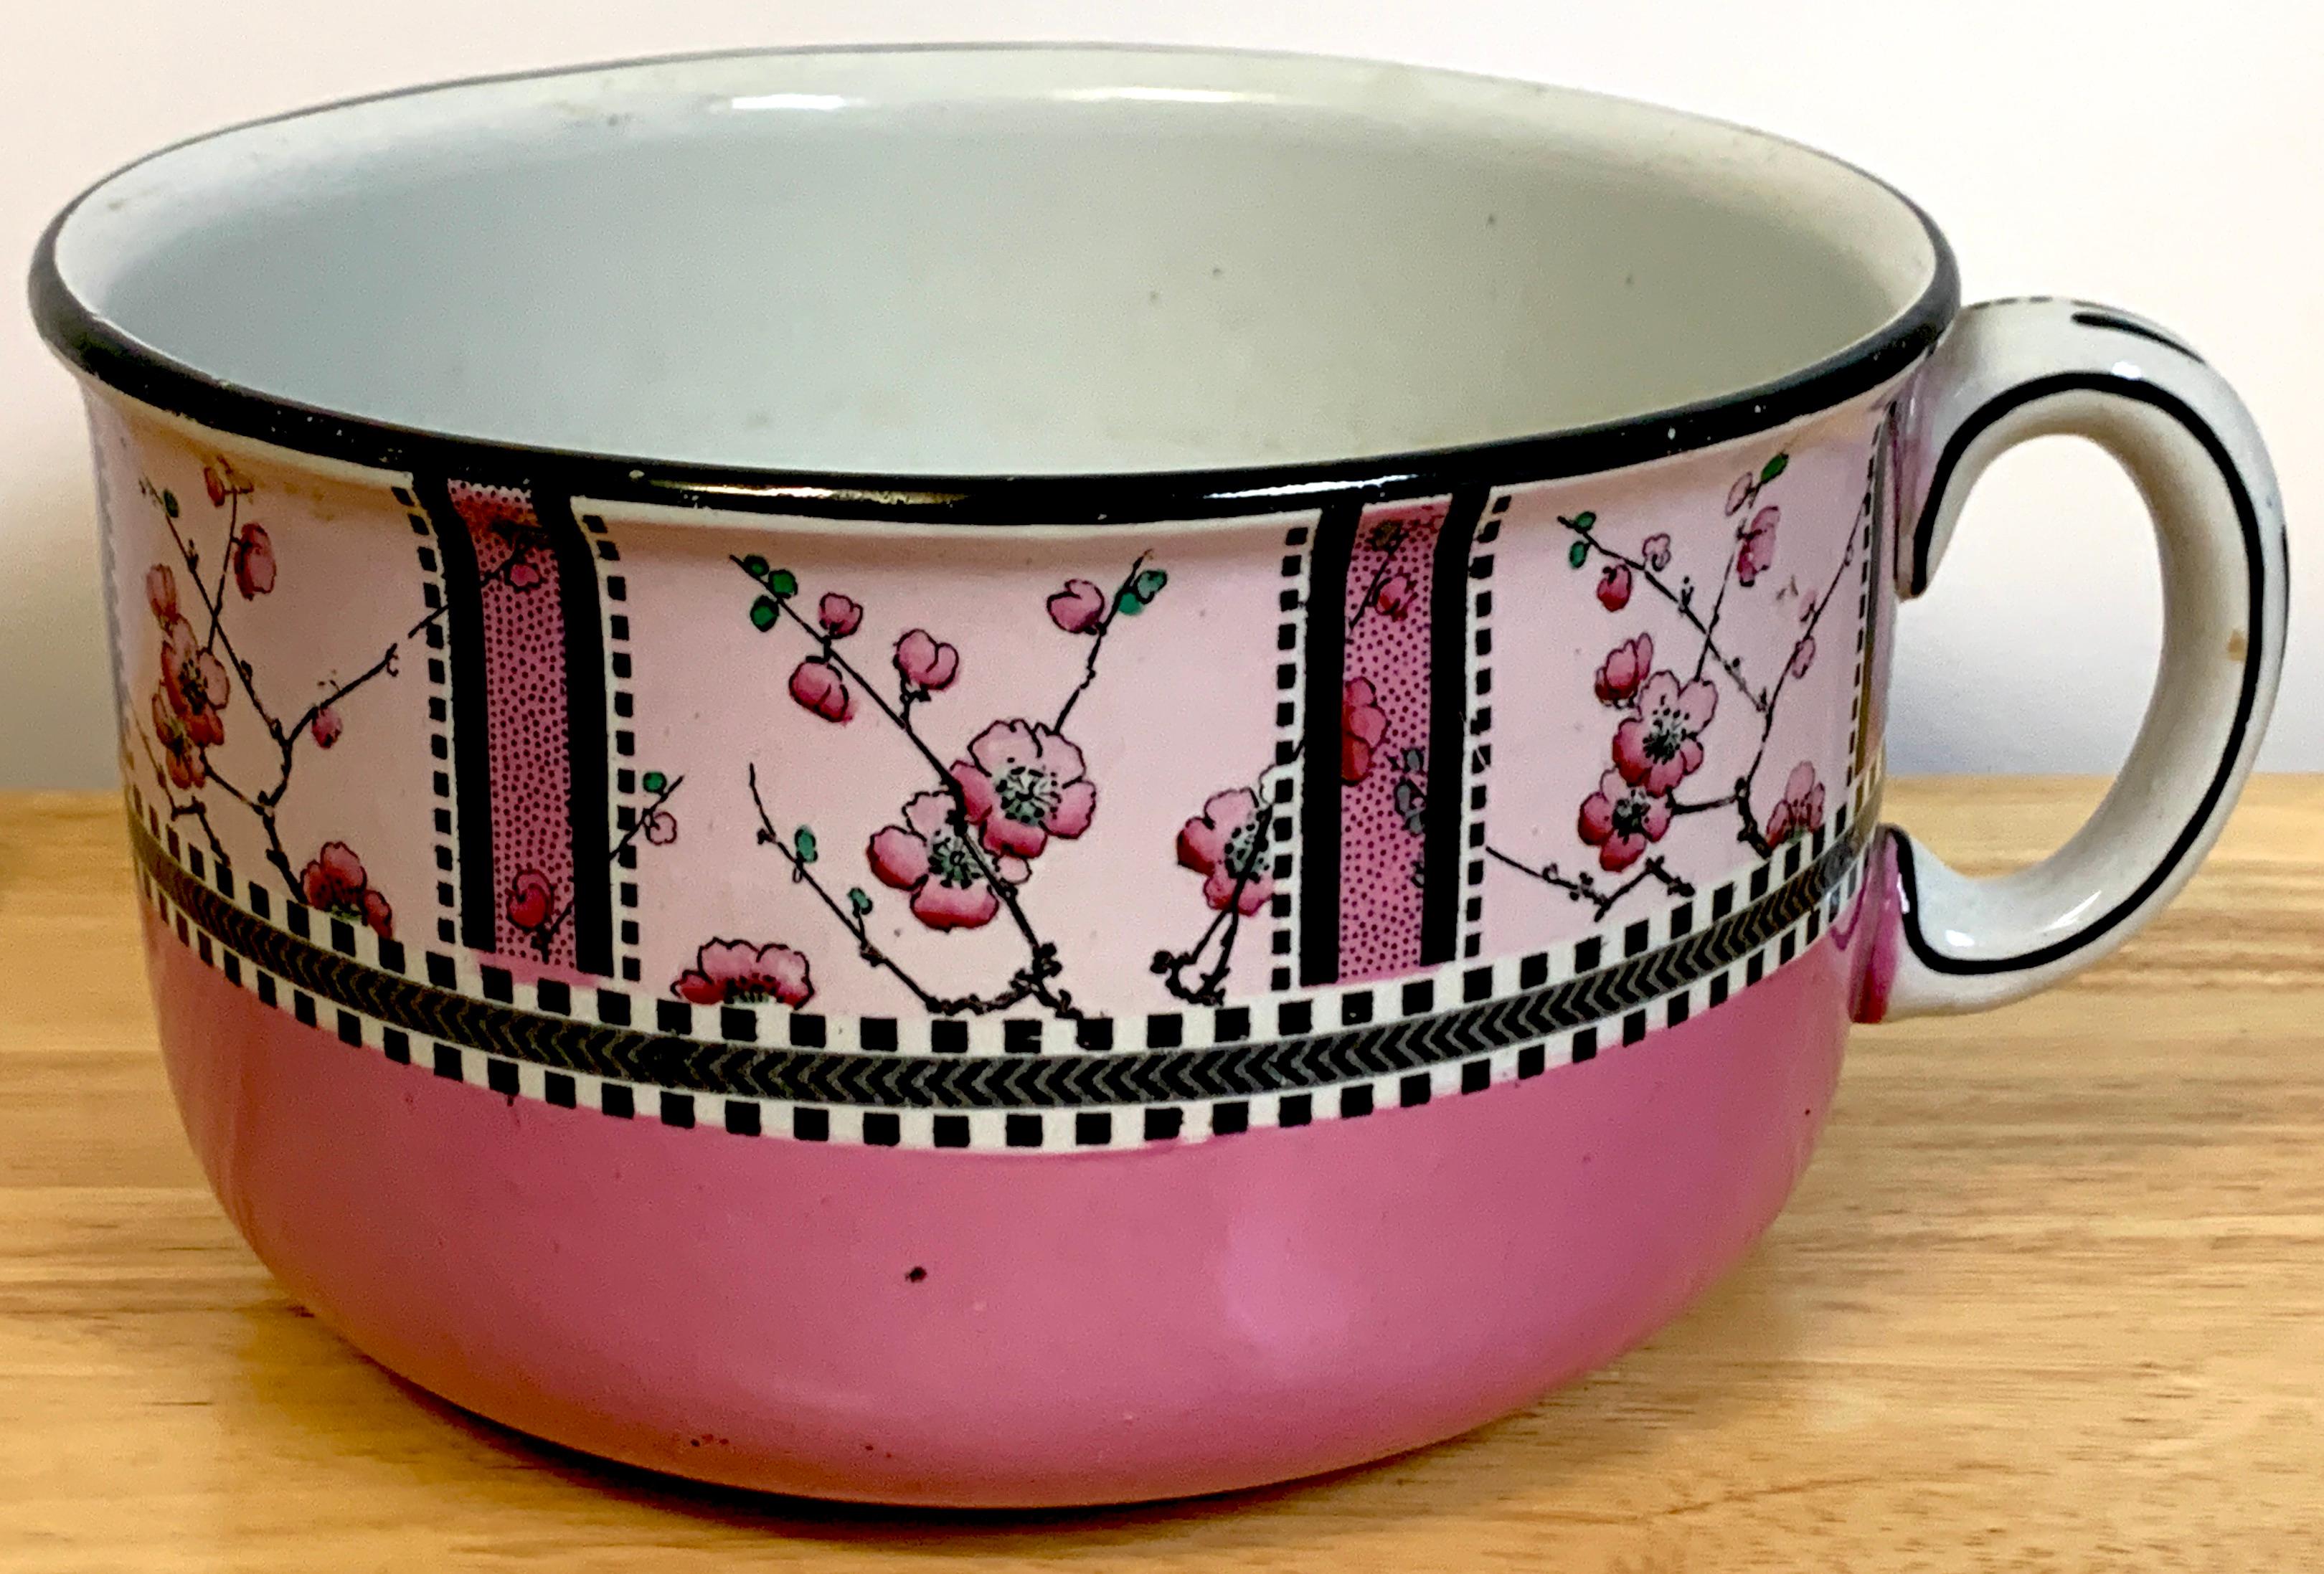 Royal Staffordshire/ Wilkinson ltd, England. Design - Spring - R N 660074, A fine example with bright and crisp decoration with Japanese Cherry Blossoms, fully marked. The piece measures 10.25-Inches to the handle, the bowl has 8.5-inch diameter and